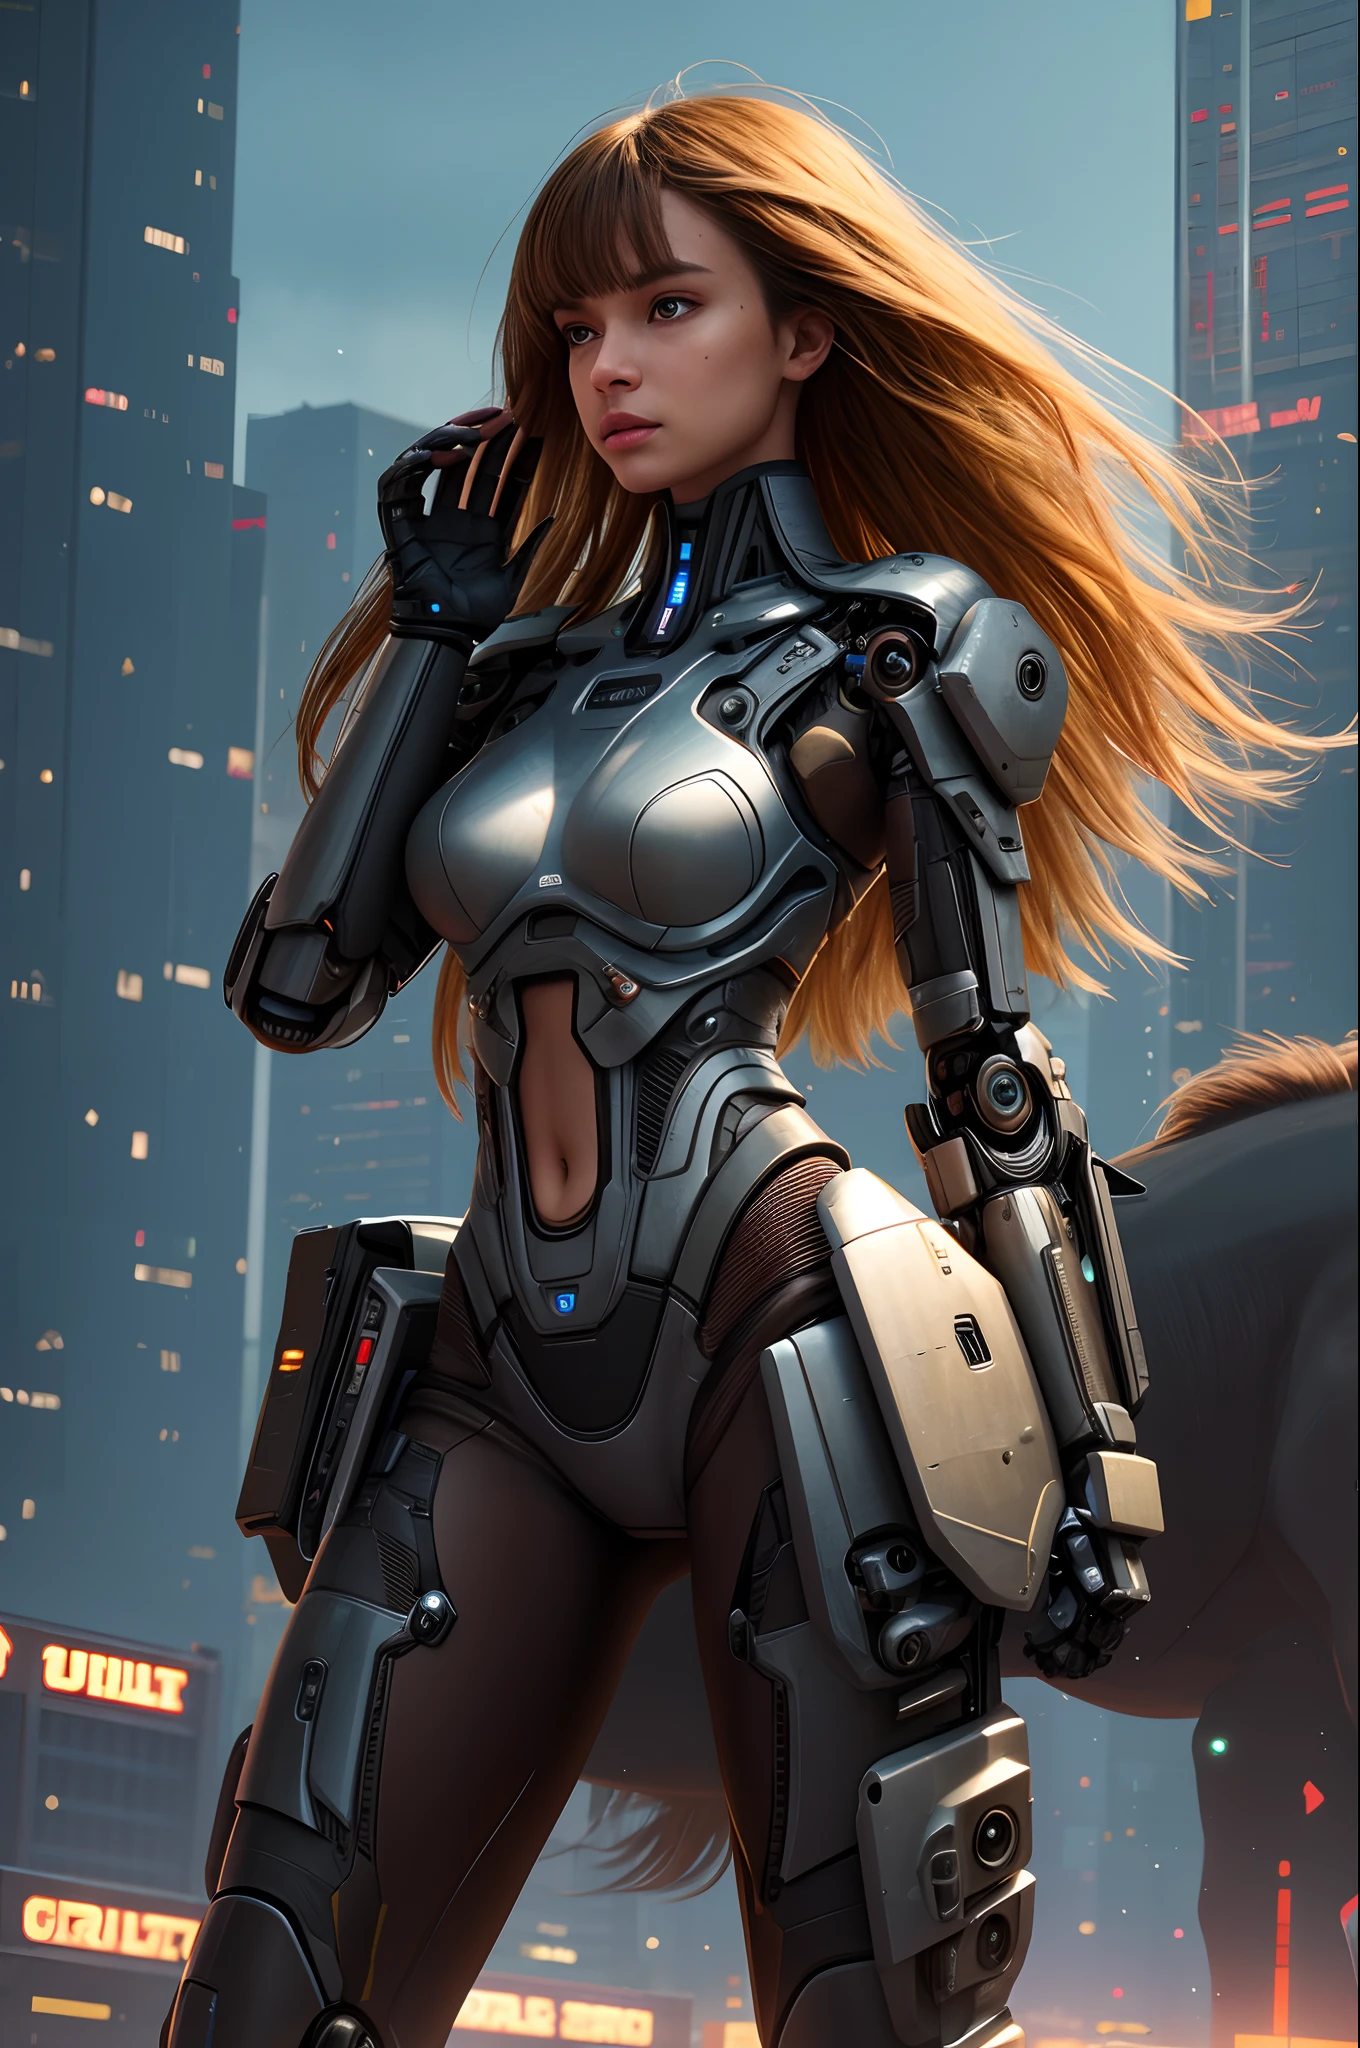 realistic, detailed, best illustrations, intricate details
break,
1girl, solo, long hair, extremely beautiful, slender, tanned skin, small breast, detailed skin complexion, seductive face, nanosuit, bodyarmor, mechanical spine, mechanical arm, robotic armor, bodysuit, ((riding a horse)), open jacket, looking at viewer
break,
detailed background, futuristic, fantasy, brutalist architecture, sci-fi, cyberpunk, dystiopian, night, highway
break,
perspective, rule of third, depth and dimension, depth of field, light and shadow contrast,
break,